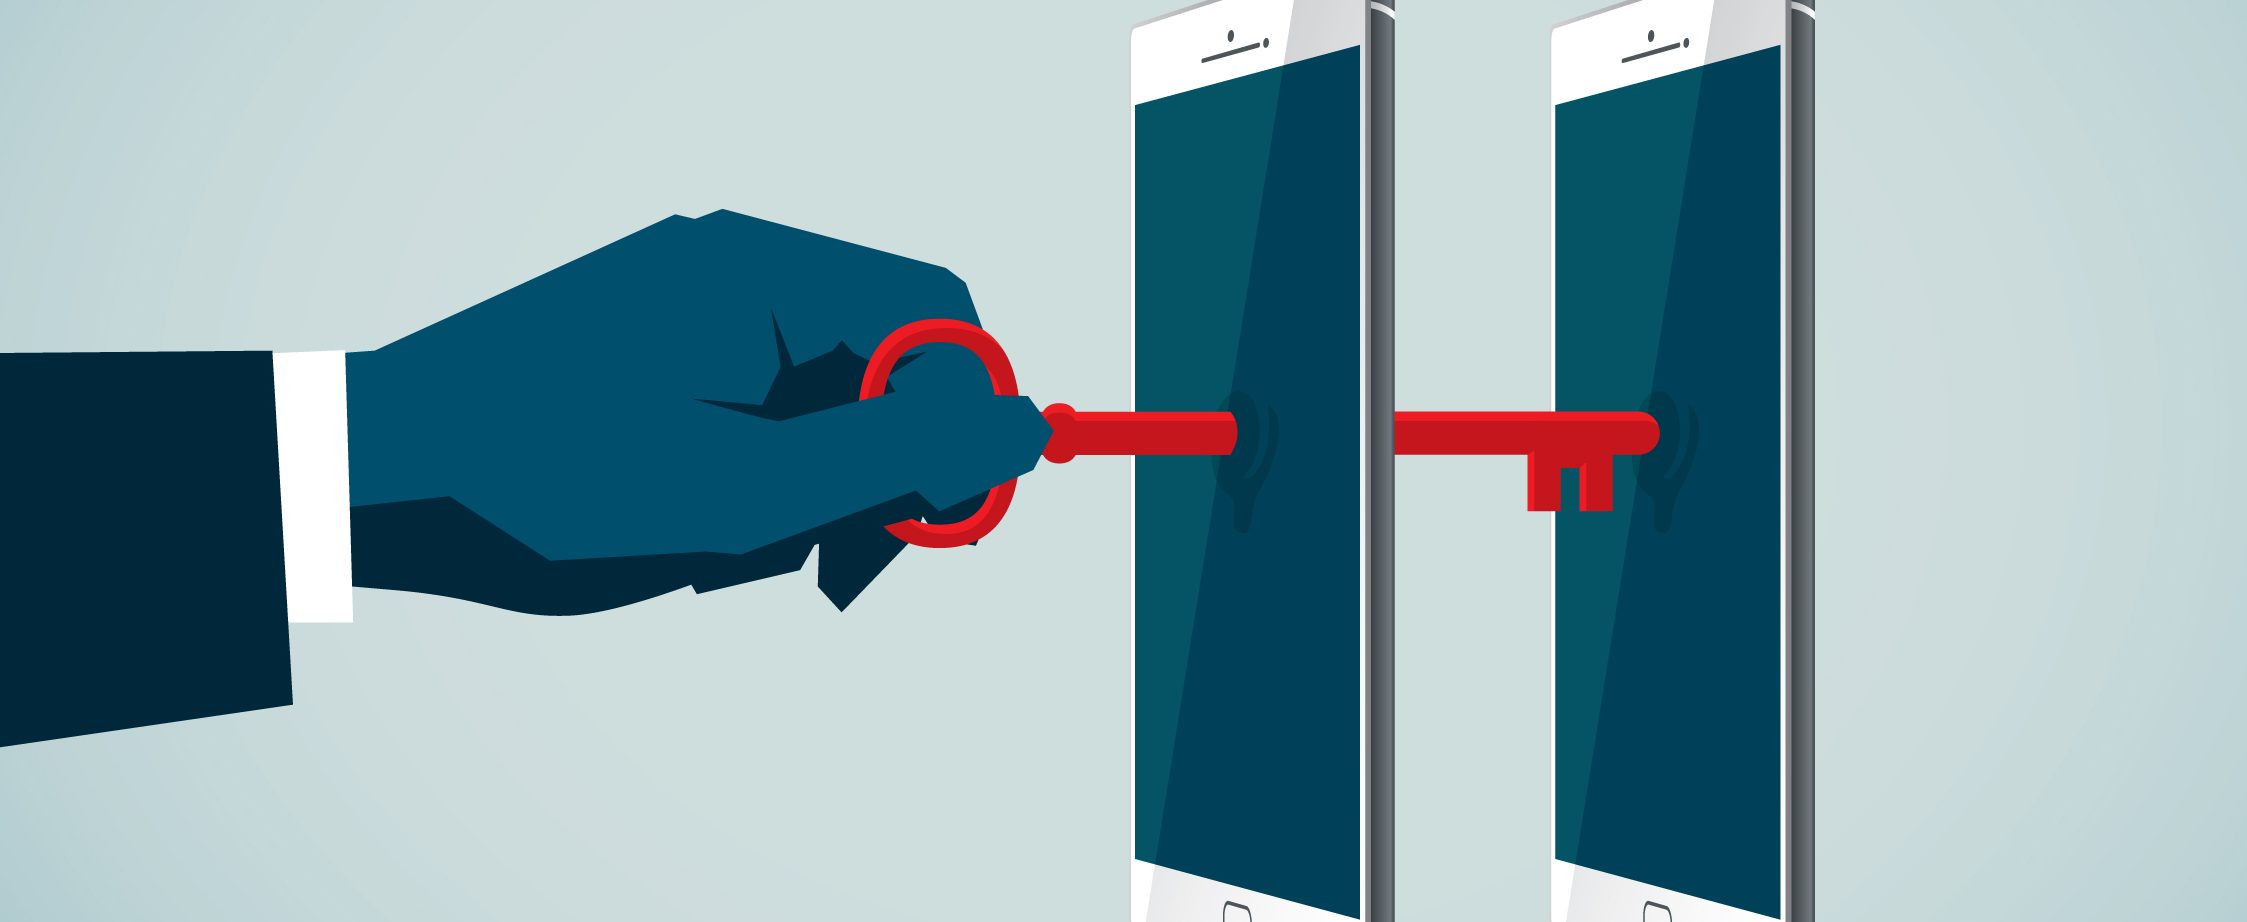 Graphic showing a hand inserting a key through two mobiles devices.